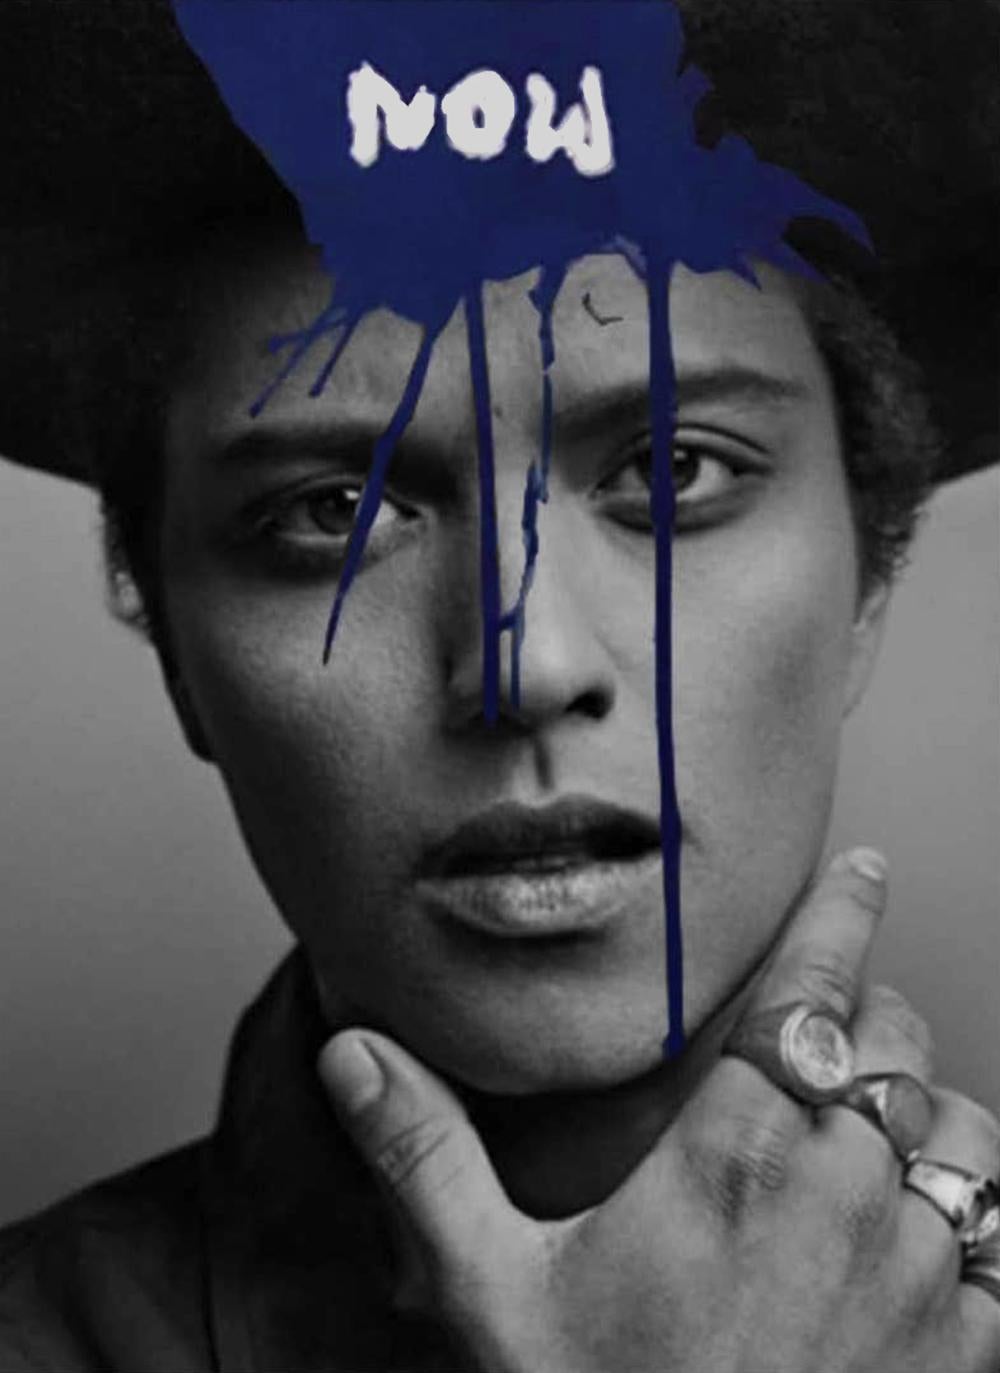 Now - Bruno Mars portrait. From the Blue series - Mixed Media Art by Hunter & Gatti